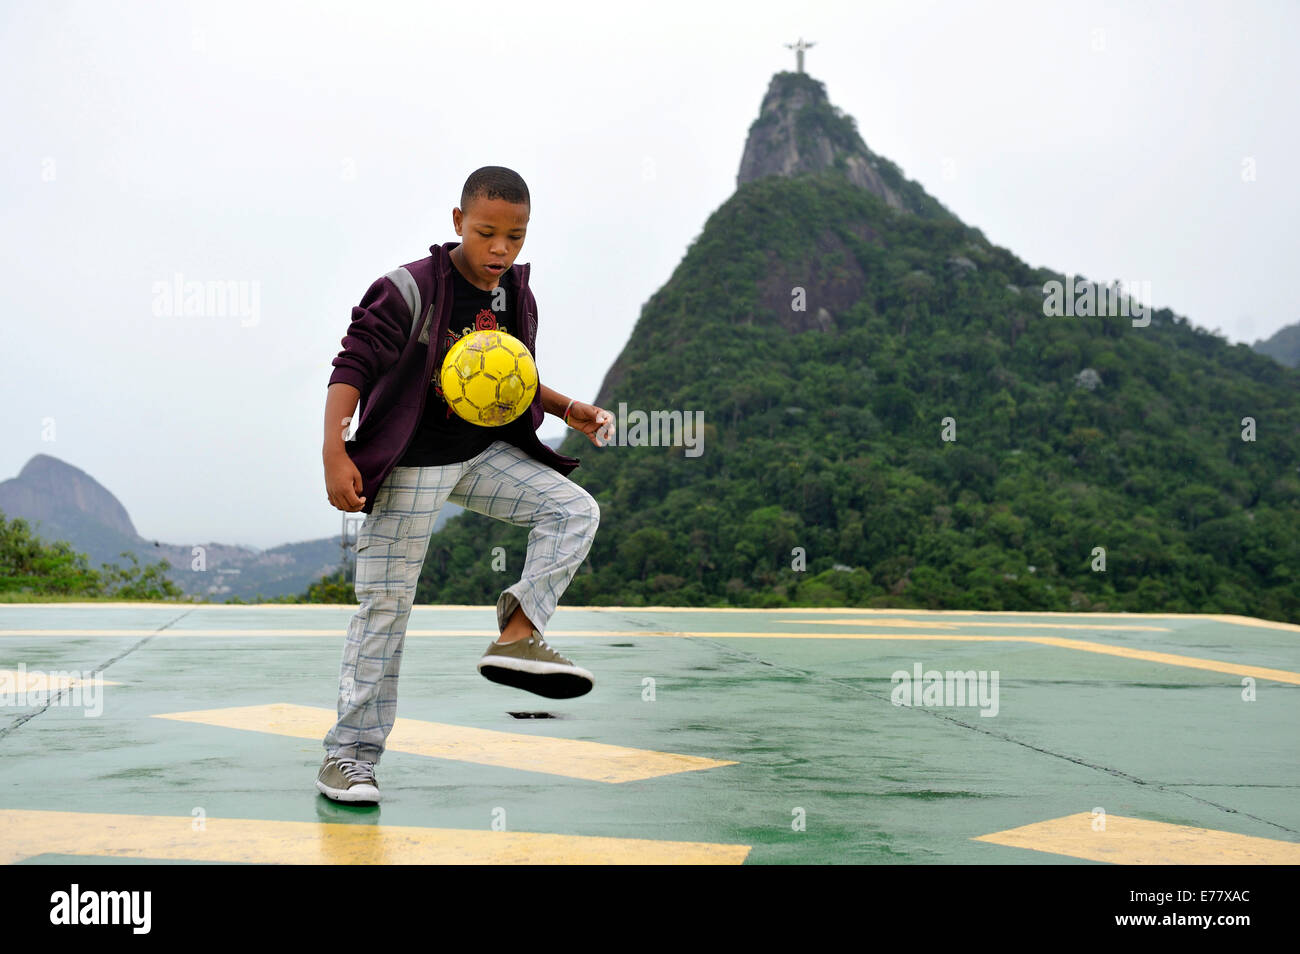 Teenager, 15 years, playing with a soccer ball, Corcovado mountain with the statue of Cristo Redentor at the back Stock Photo